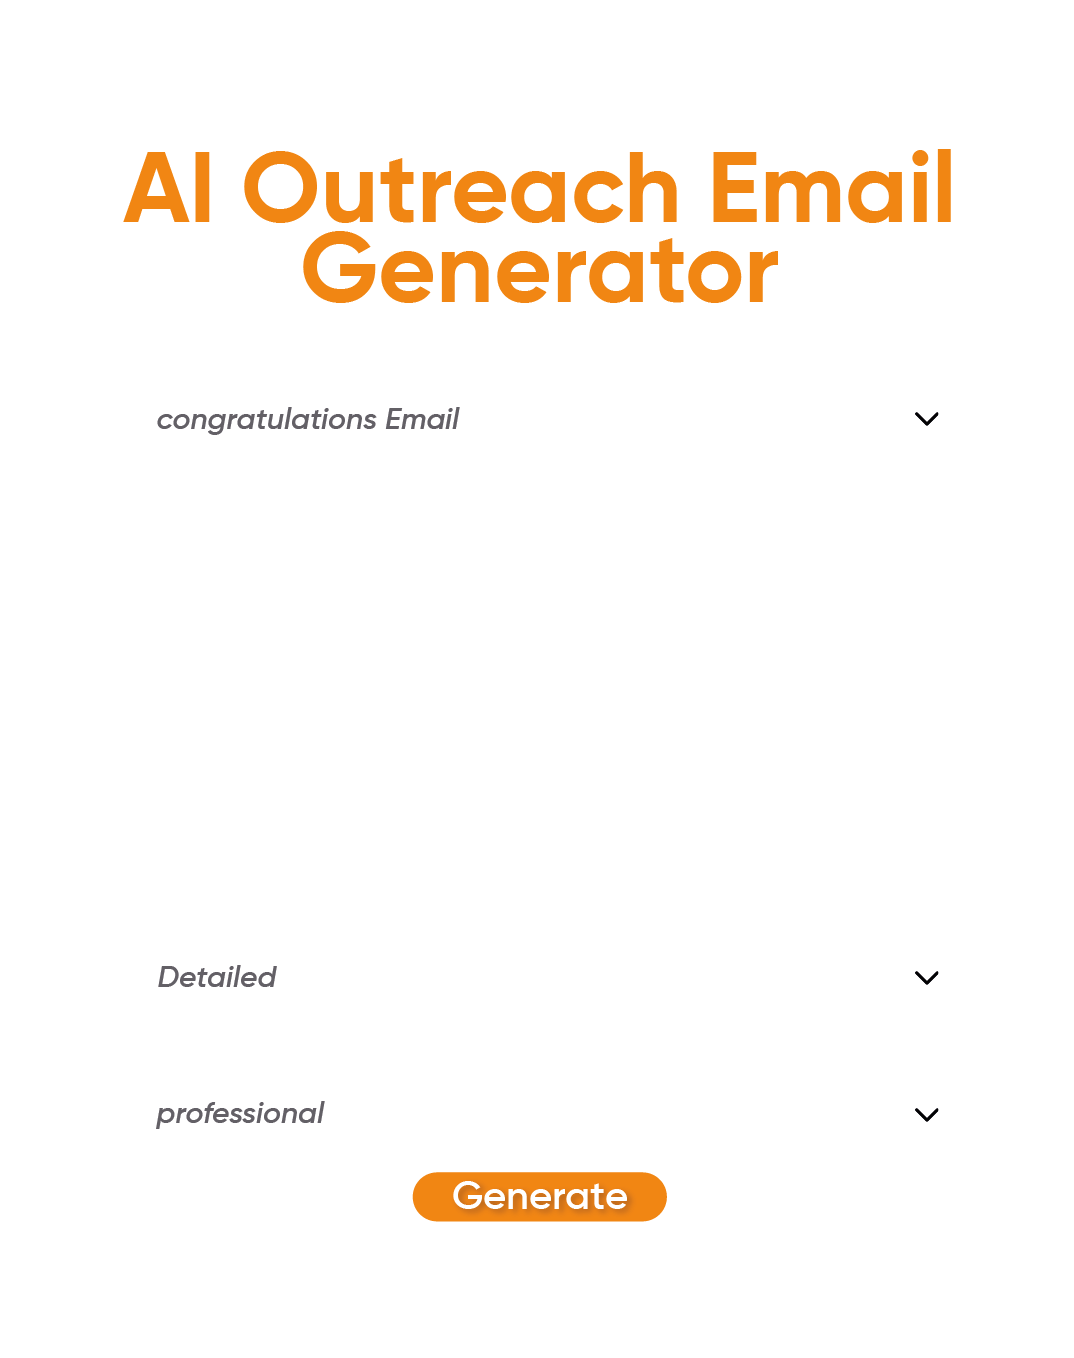 How to Use AI Generate Outreach Email Tool?